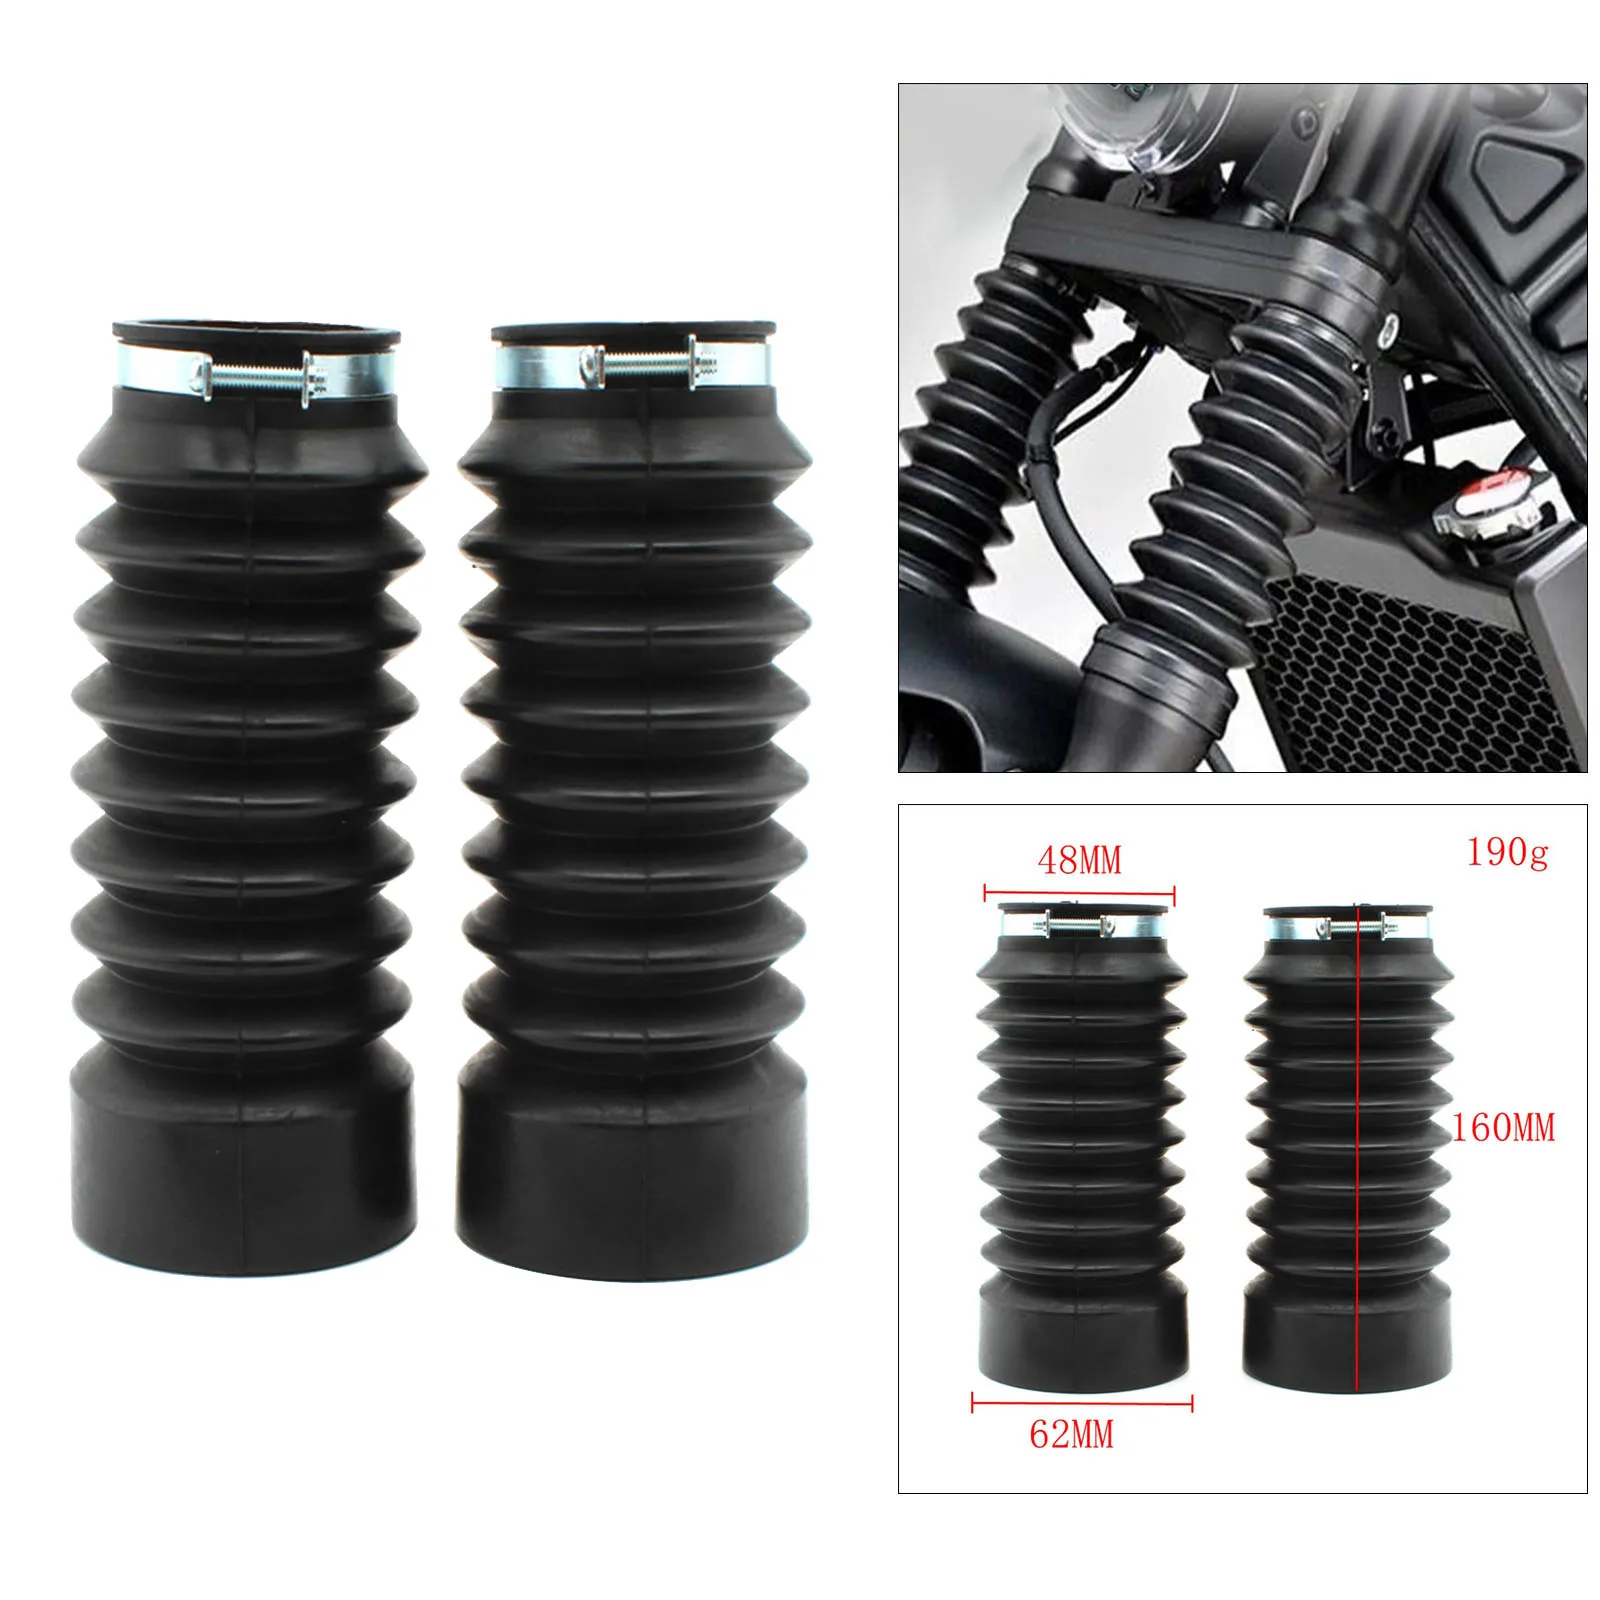 Motorcycle Front Fork Cover Shock Absorber Dust Cover Gaiters Boots for Honda Rebel CMX500 CMX300 2017-2021